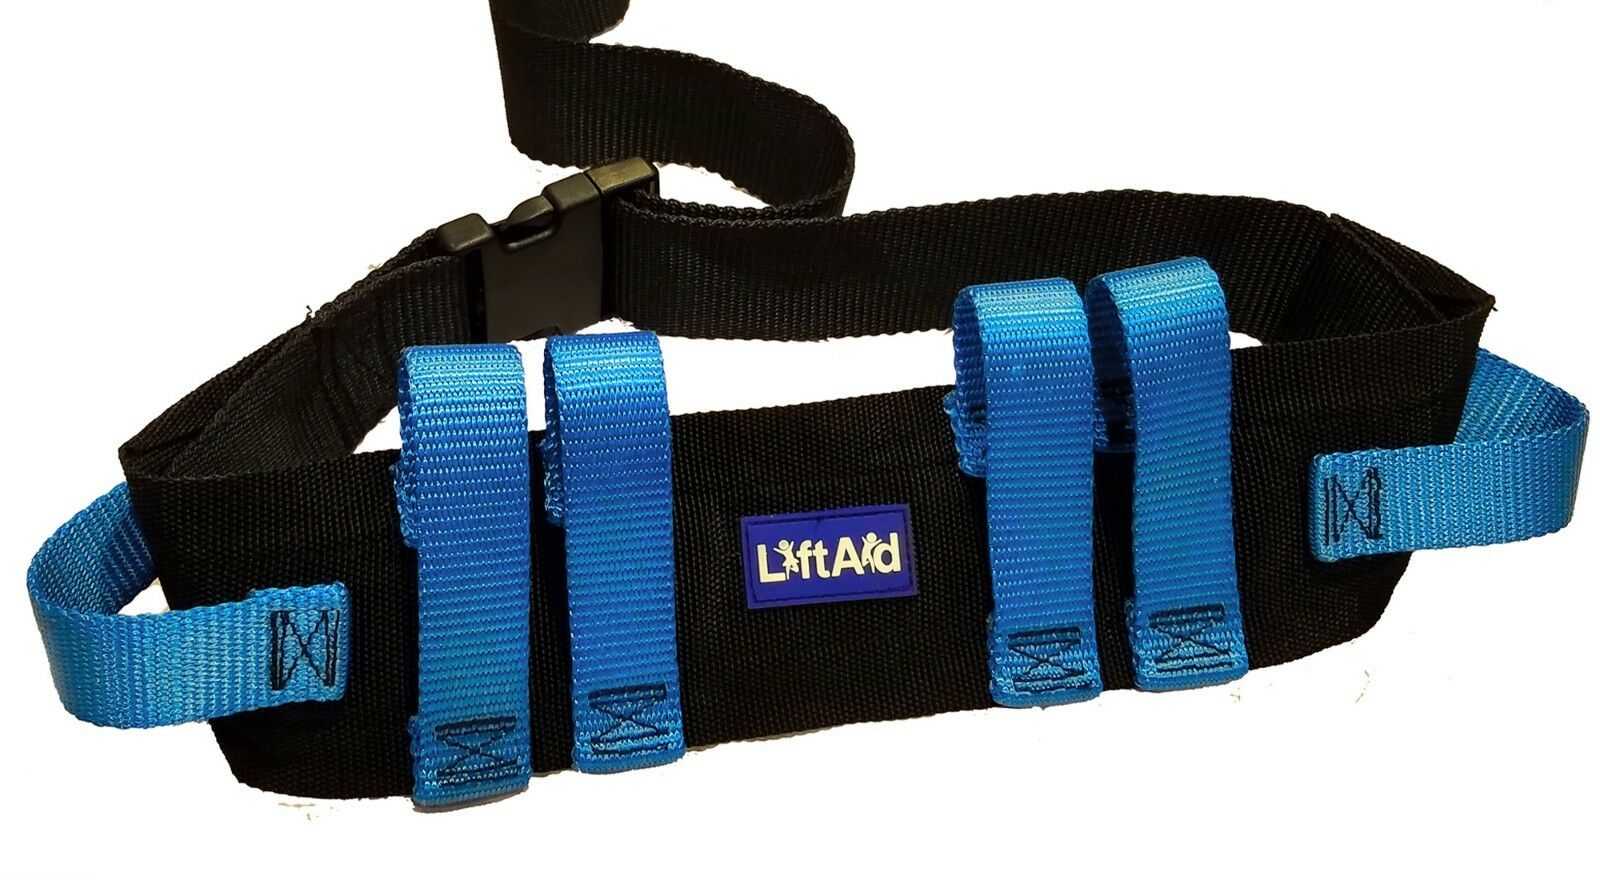 Gait Belt For Transfer & Walking With 6 Hand Grips Quick-release Buckle Liftaid